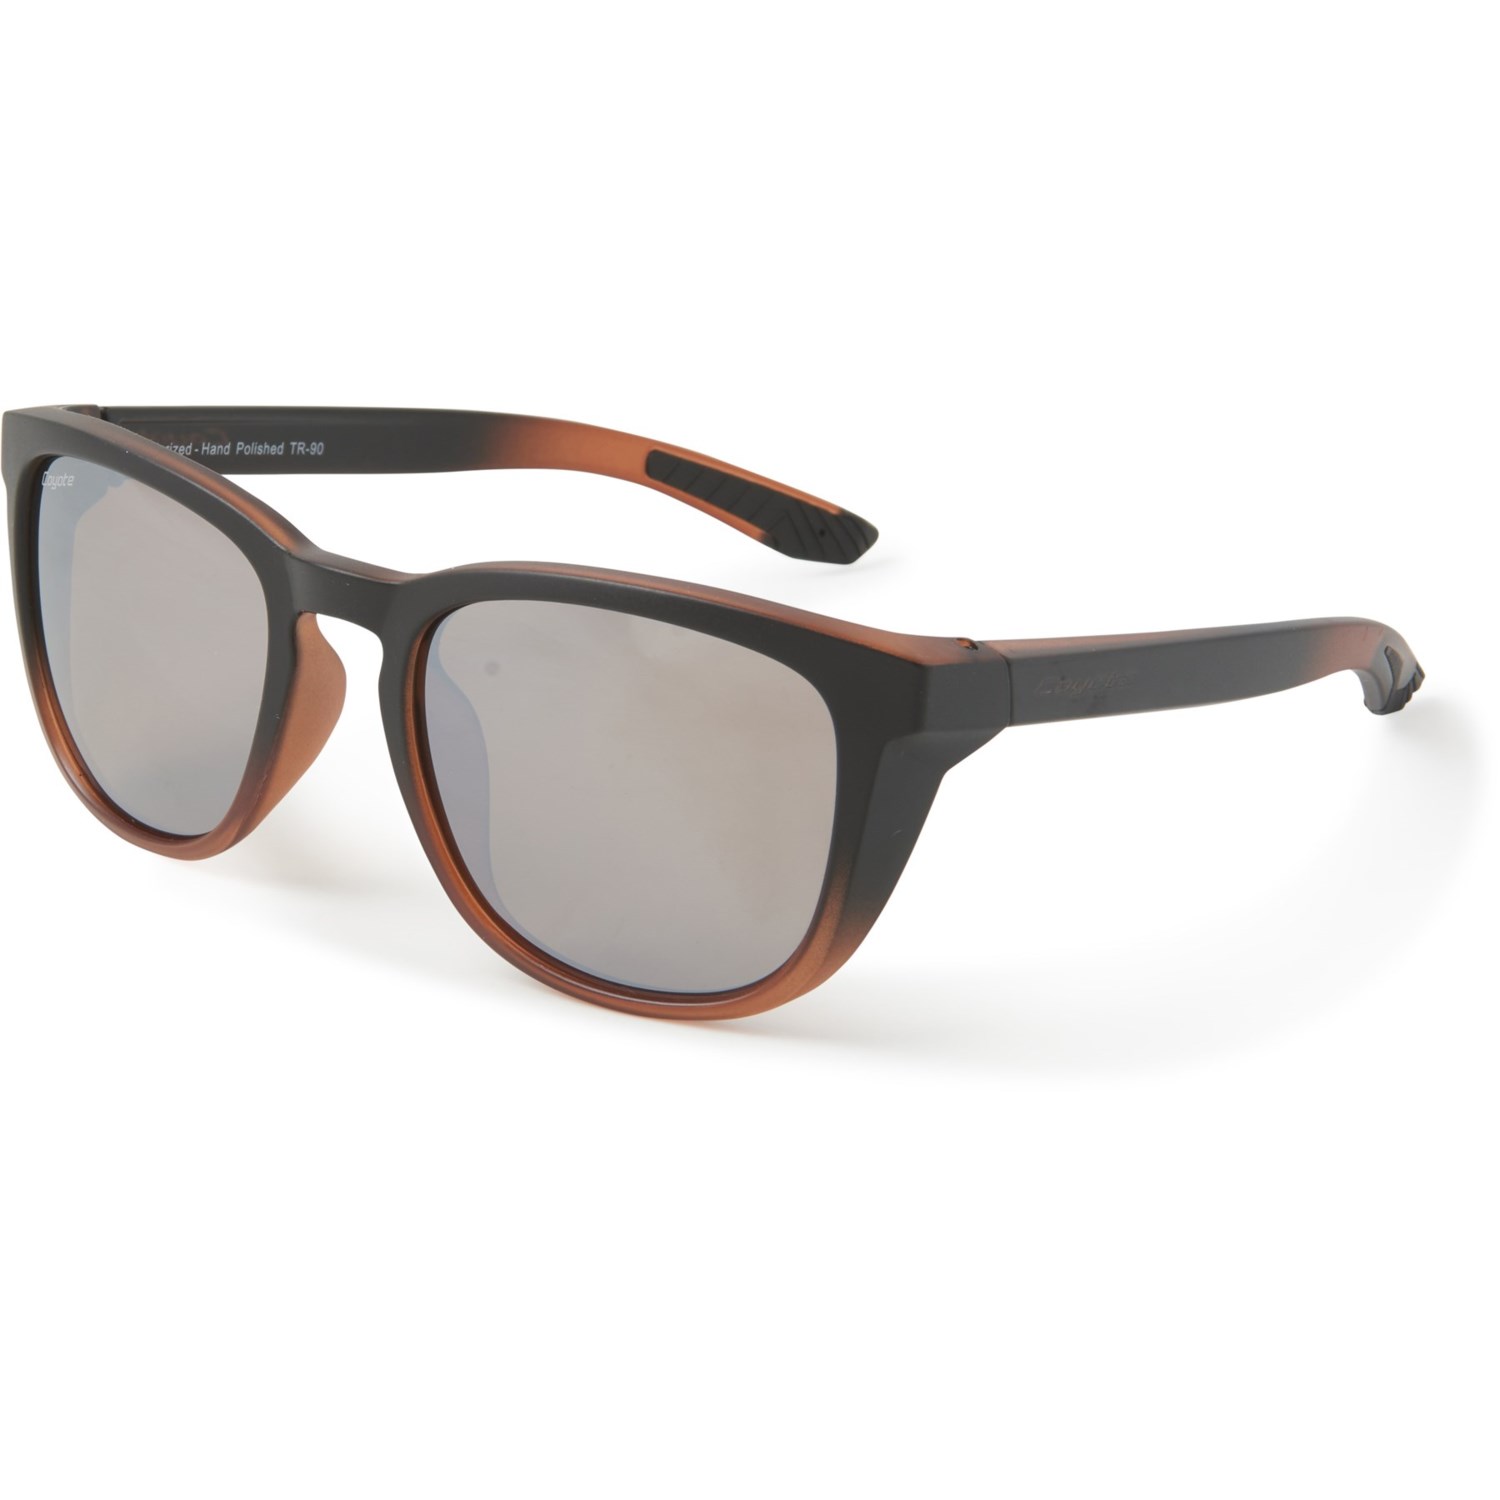 Coyote Eyewear Offshore Sunglasses (For Men and Women) - Save 55%